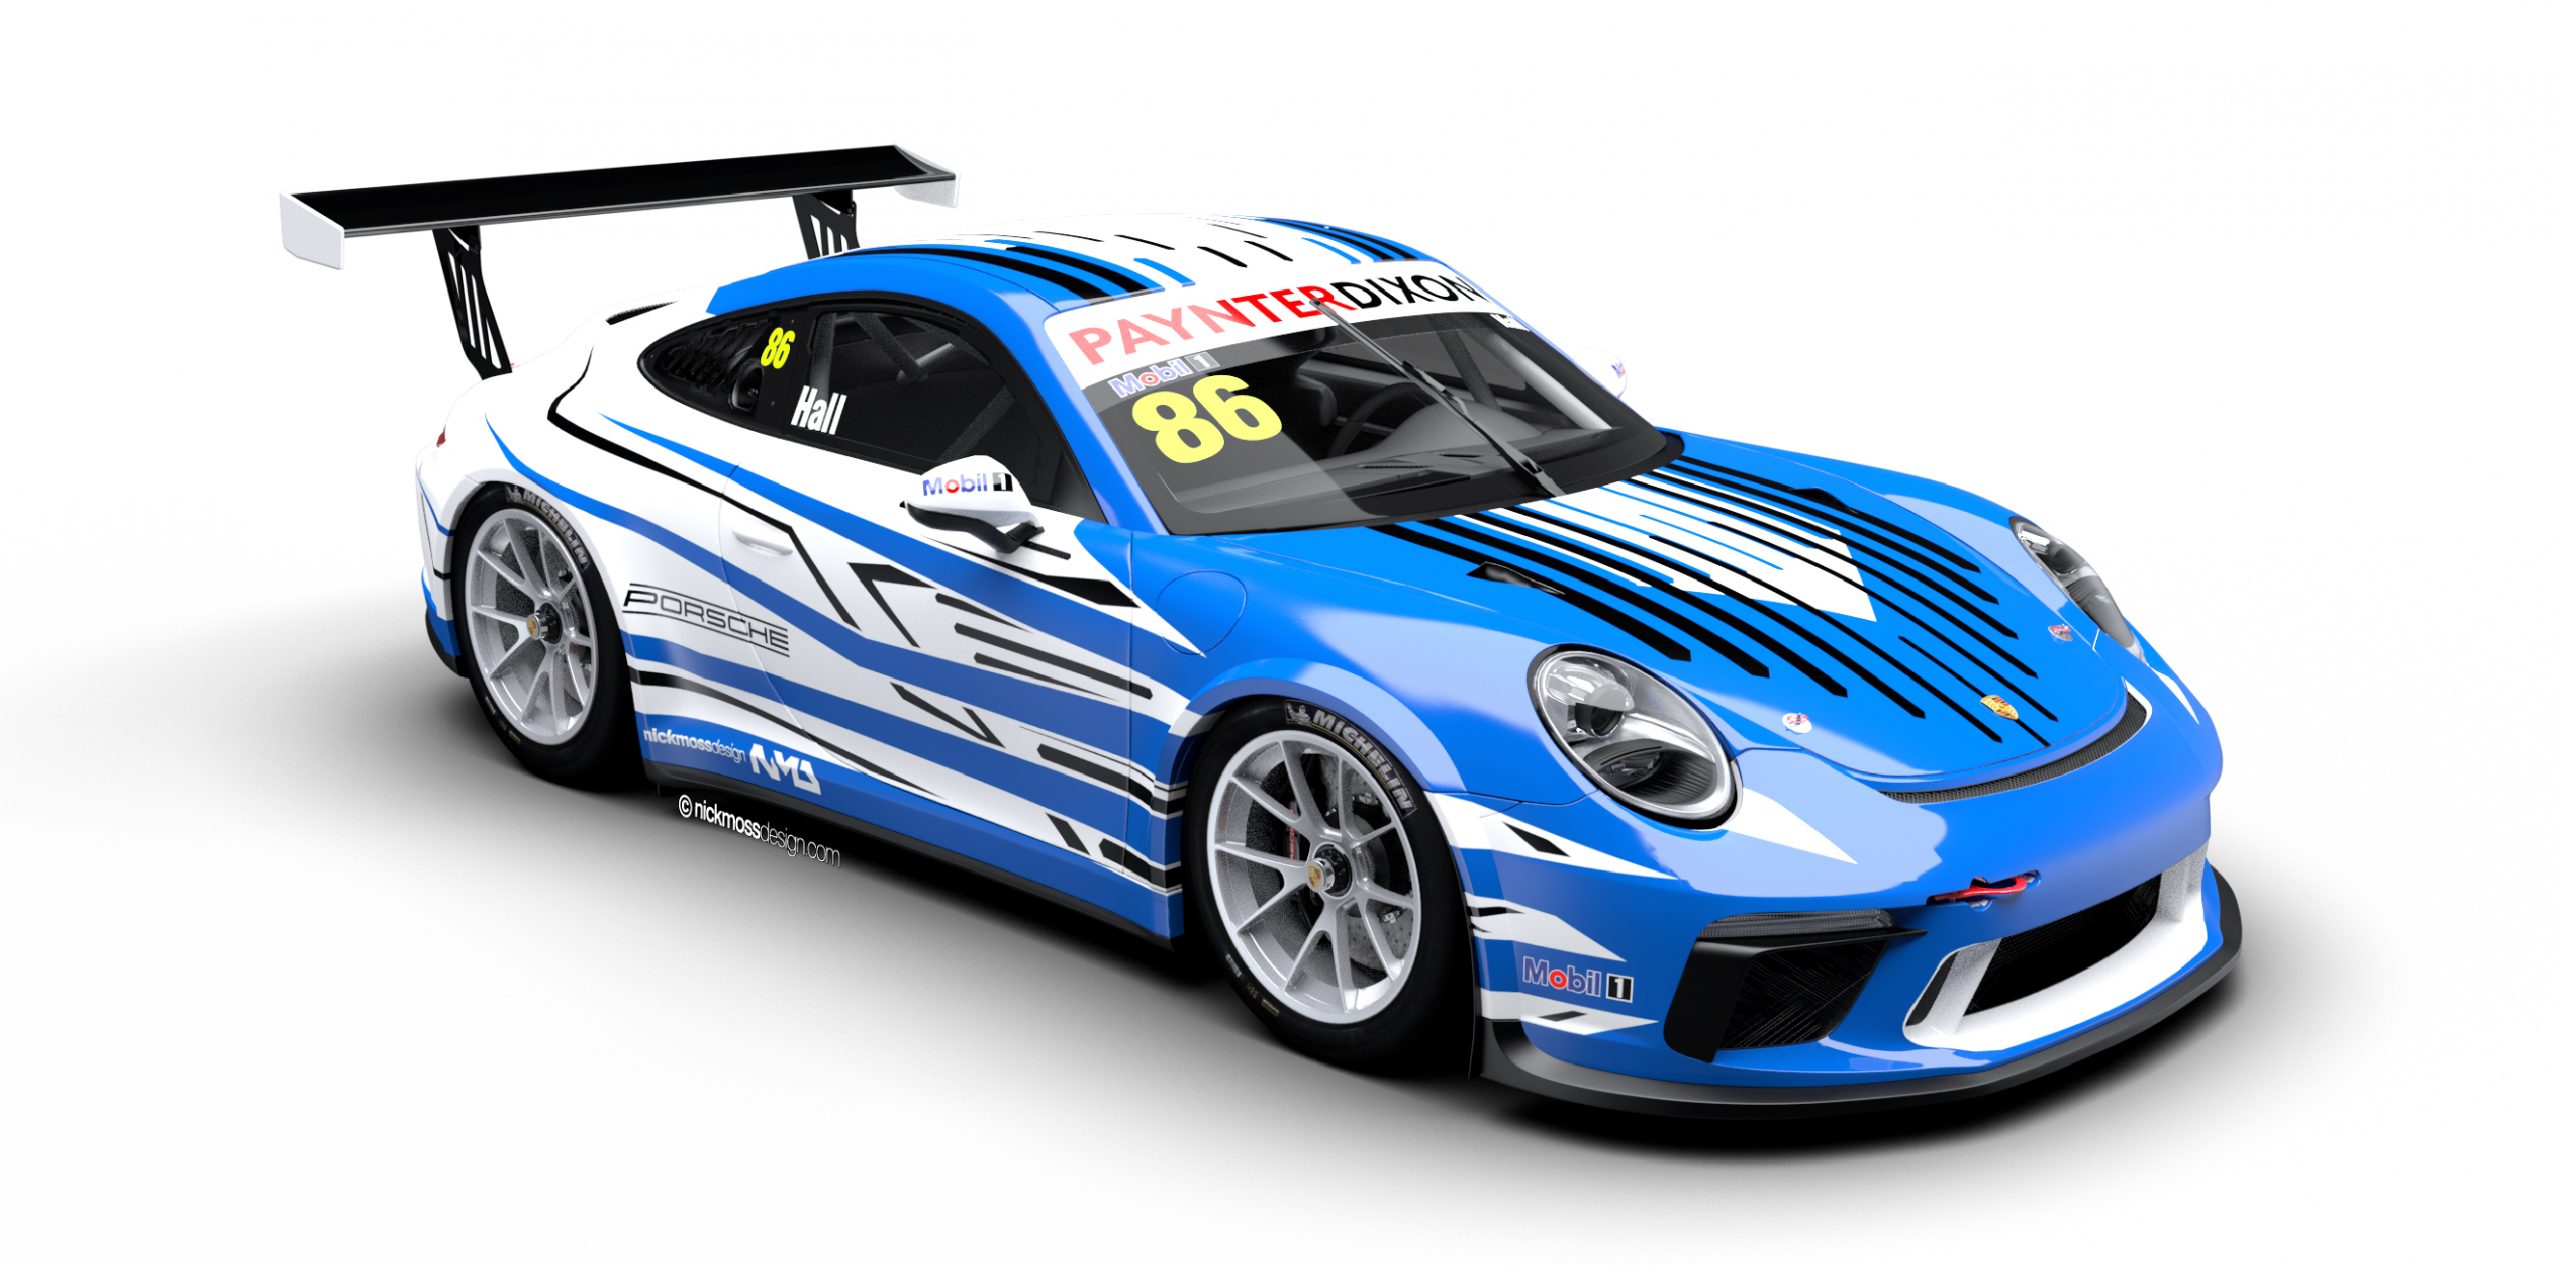 Drew Hall to make Carrera Cup Debut